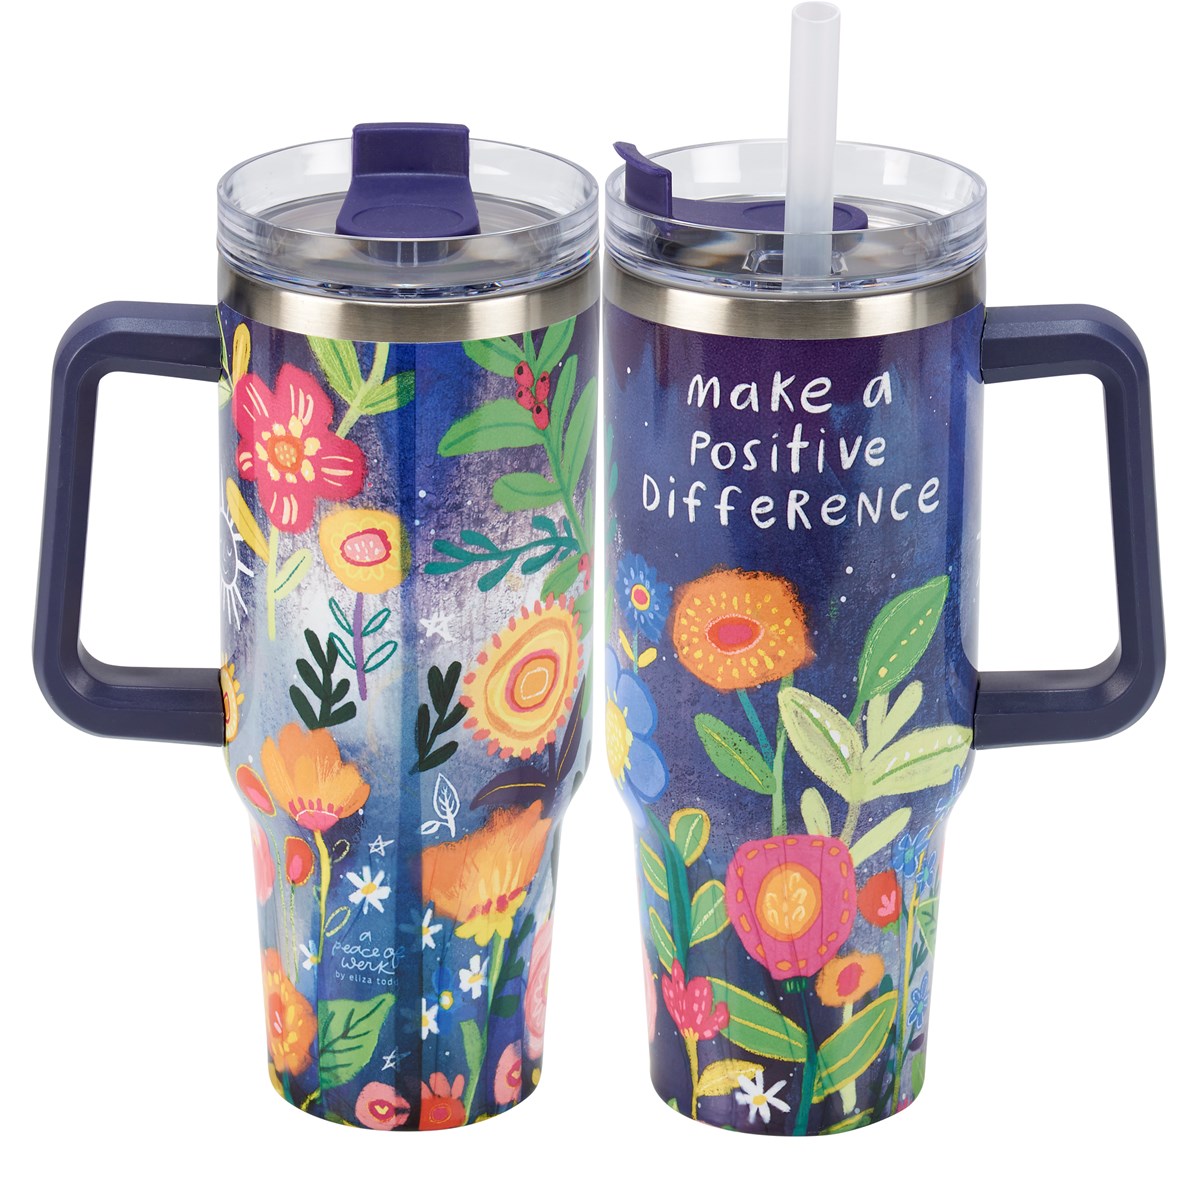 😊 WARM + COZY DAY 19 ✨ Make A Positive Difference 40 oz Travel Mug Hot/Cold